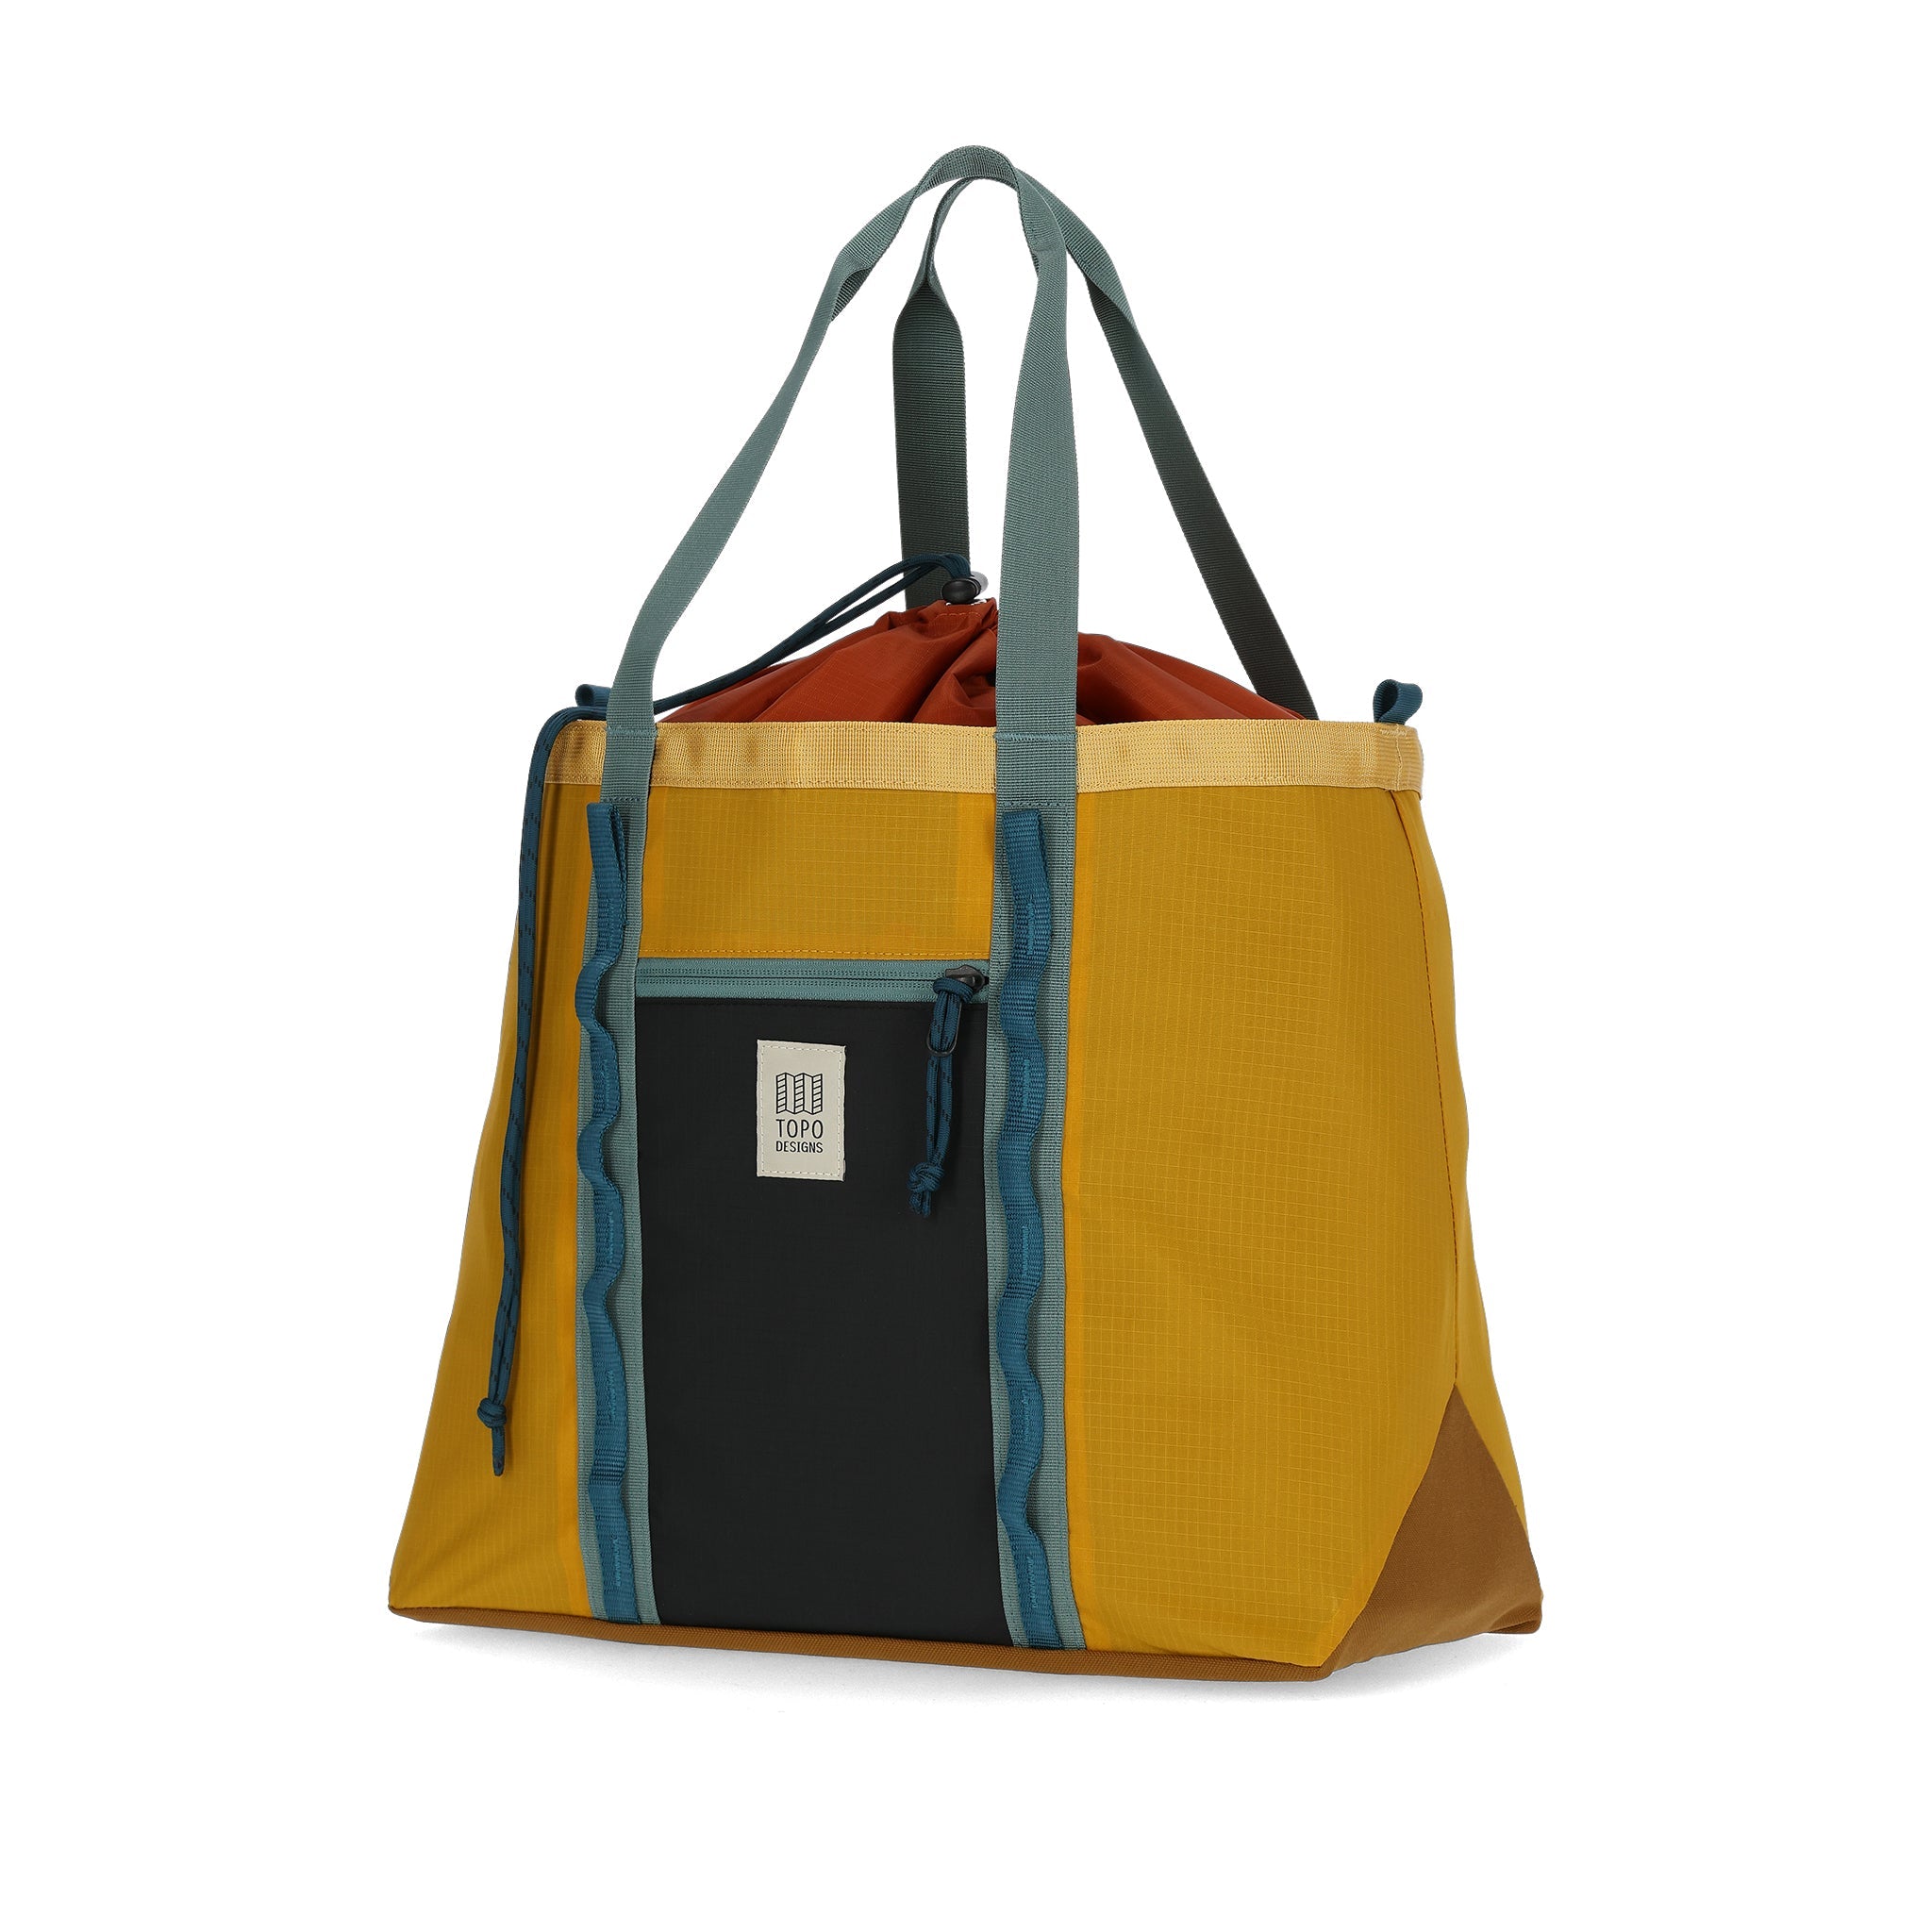 Front View of Topo Designs Mountain Utility Tote in "Mustard / Black"